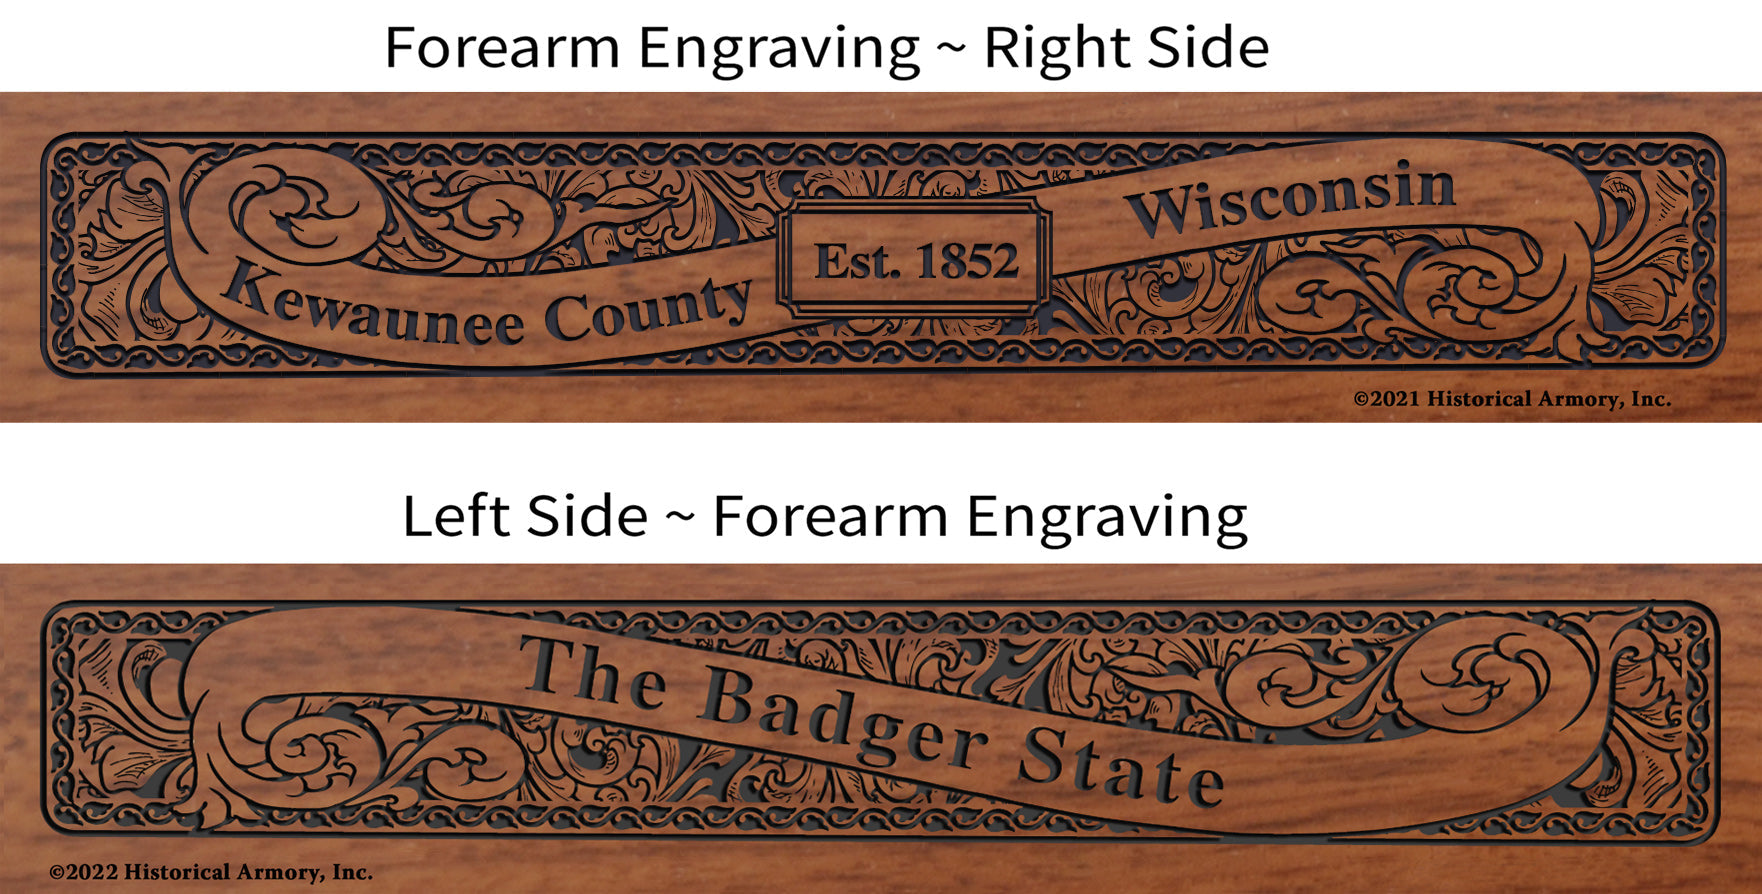 Kewaunee County Wisconsin Engraved Rifle Forearm